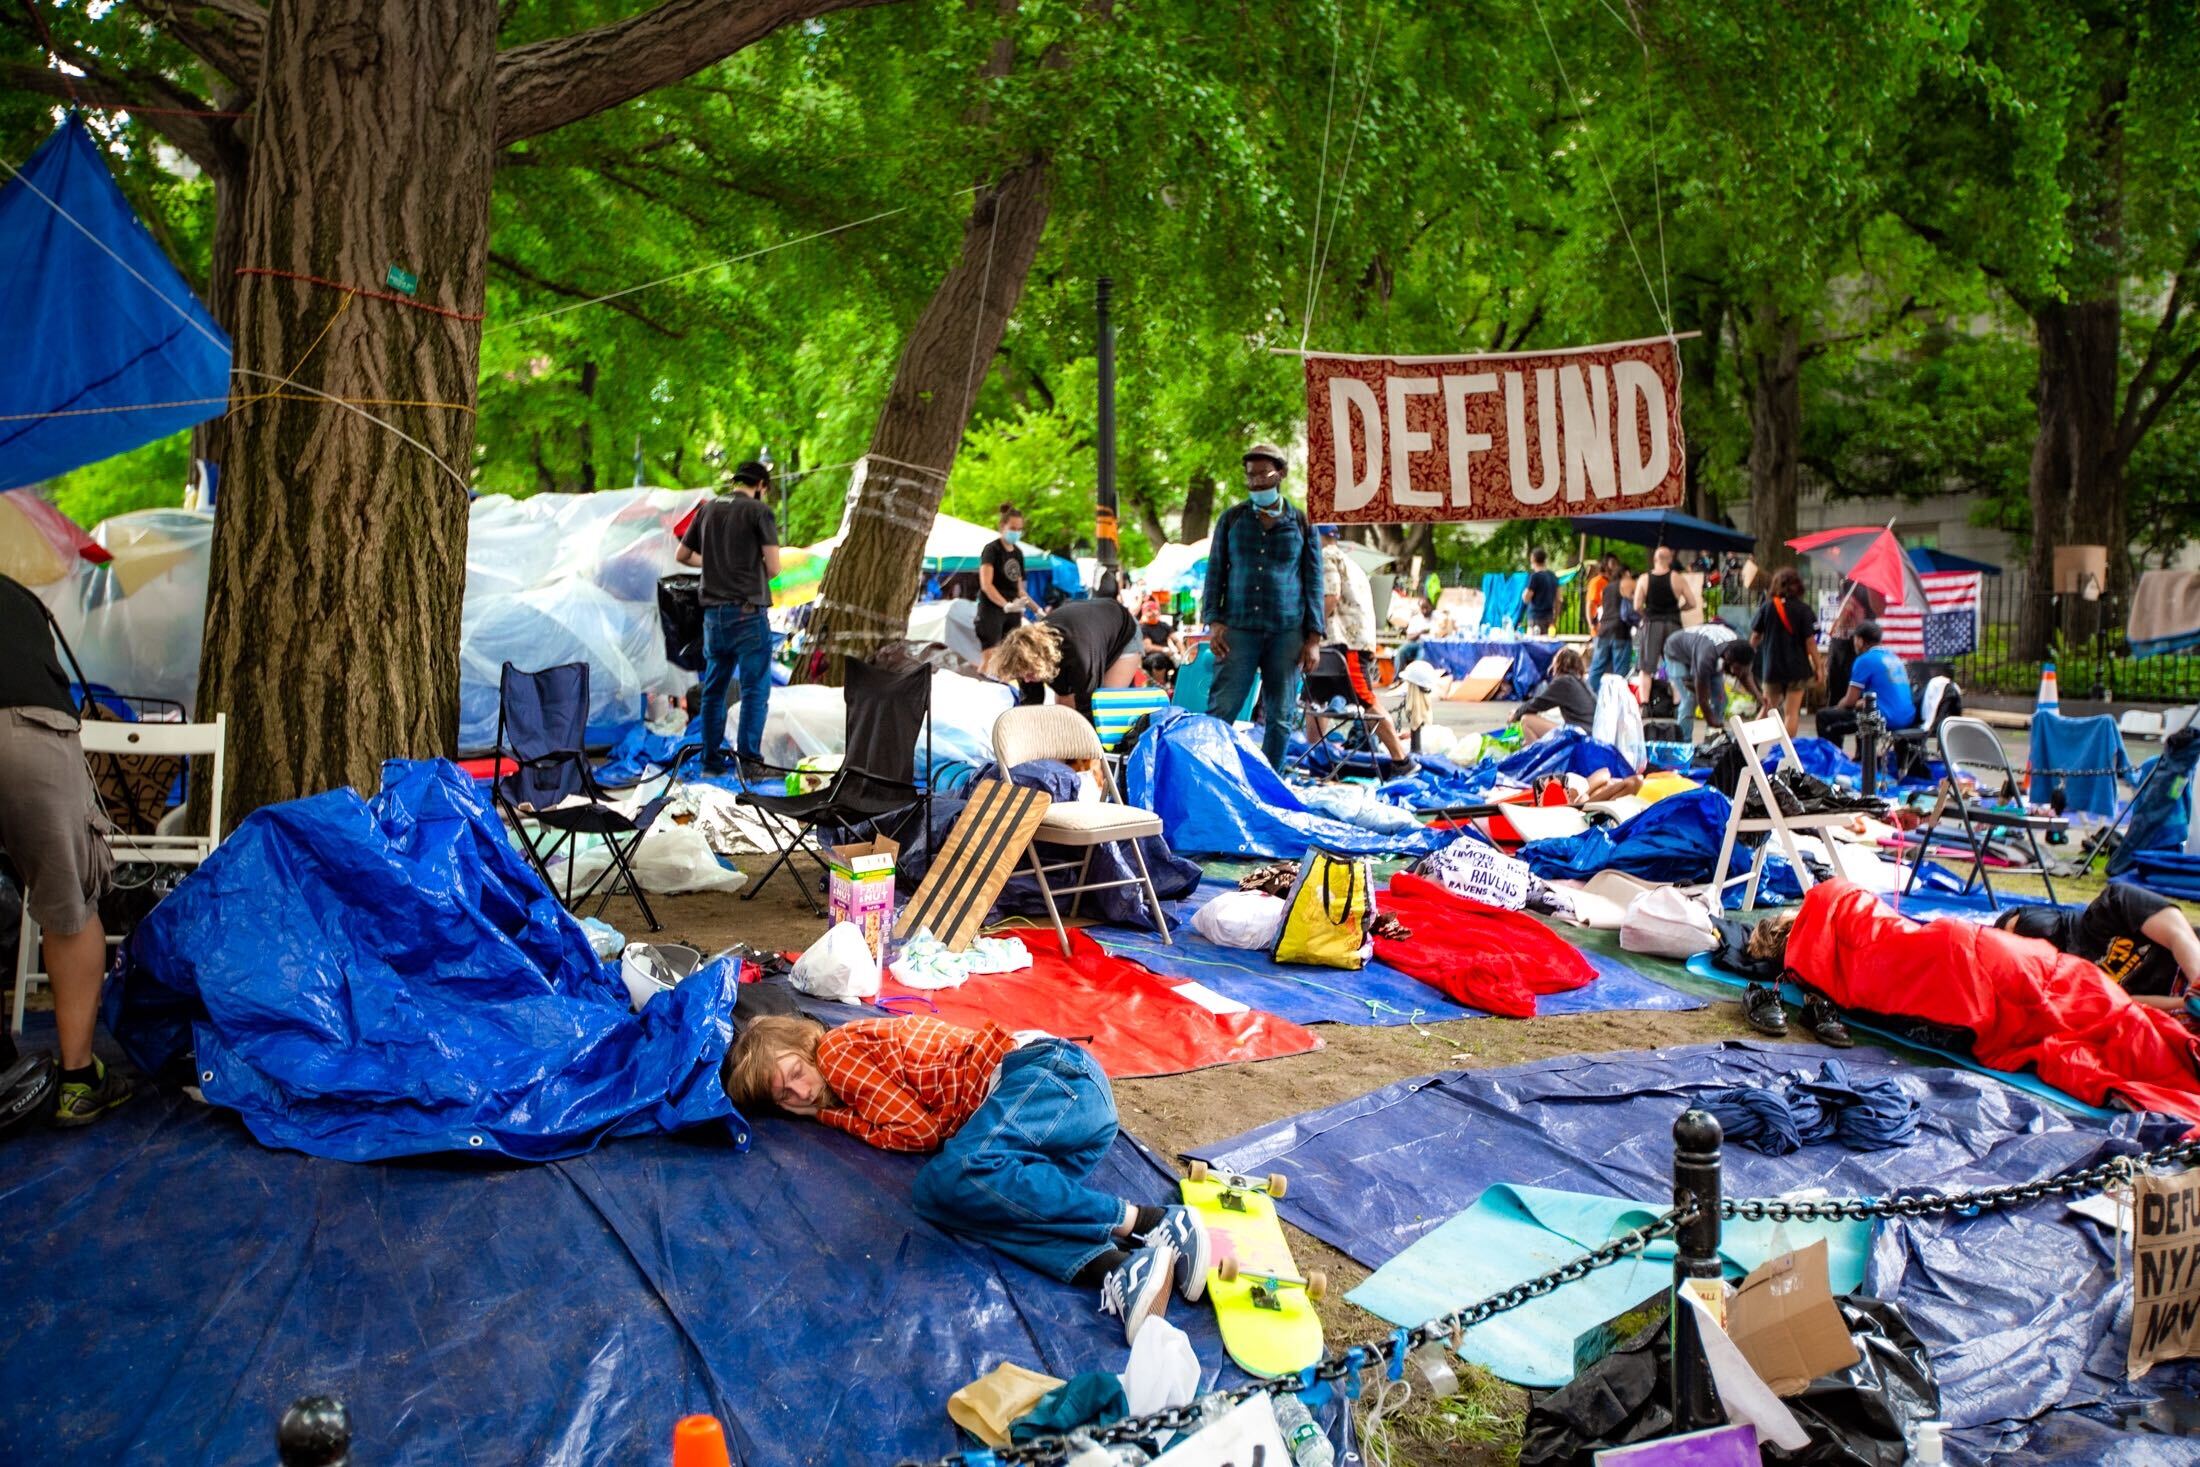 An Occupy City Hall camp in New York.